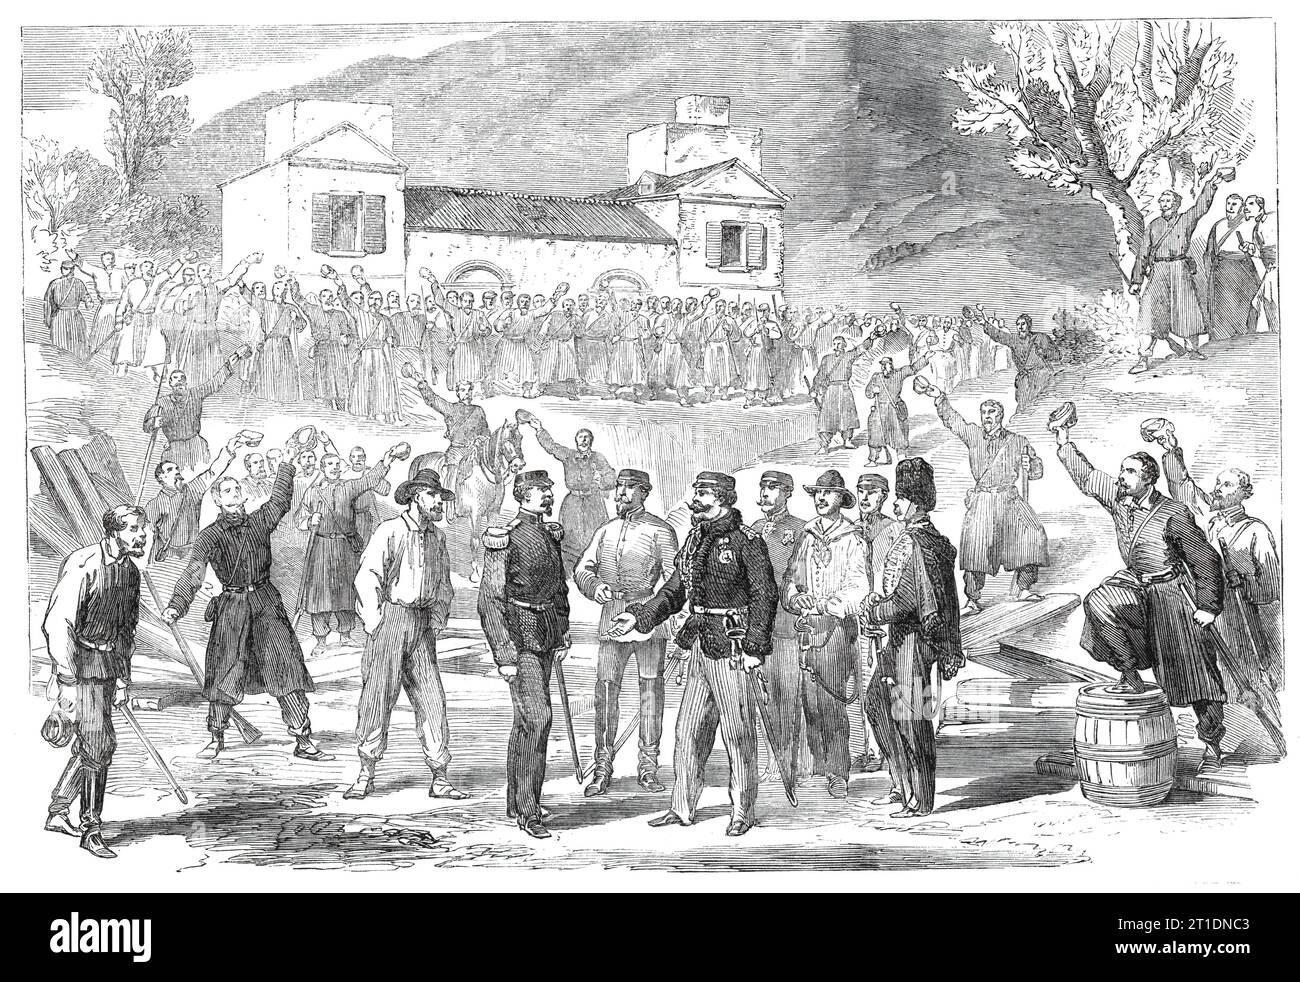 The first visit of Victor Emmanuel to the camp of the national army at St. Angelo - from a sketch by our special artist, Frank Vizetelly, 1860. Vittorio Emanuele II became the first king of an independent, united Italy since the 6th century. 'On the morning of the 27th October, Victor Emmanuel, accompanied by a few of his staff, visited the left bank of the Volturno and the camp of the Garibaldini. As soon as his presence was known to the troops they crowded the sides of the road, and gave him a most enthusiastic reception. In the rear of our Engraving is a house which had been occupied by an Stock Photo